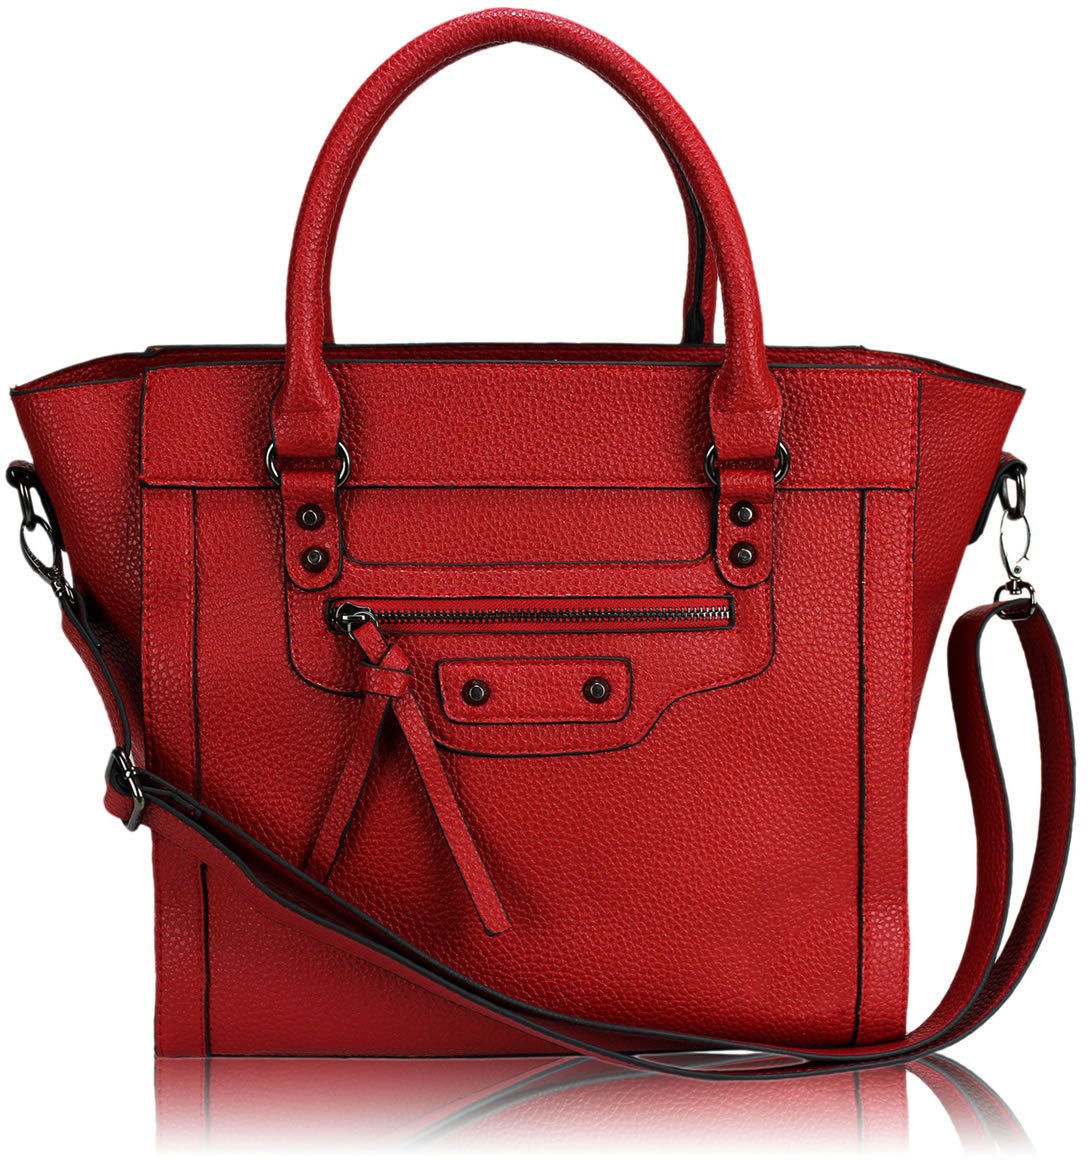 Wholesale Red Tote Handbag With Long Strap